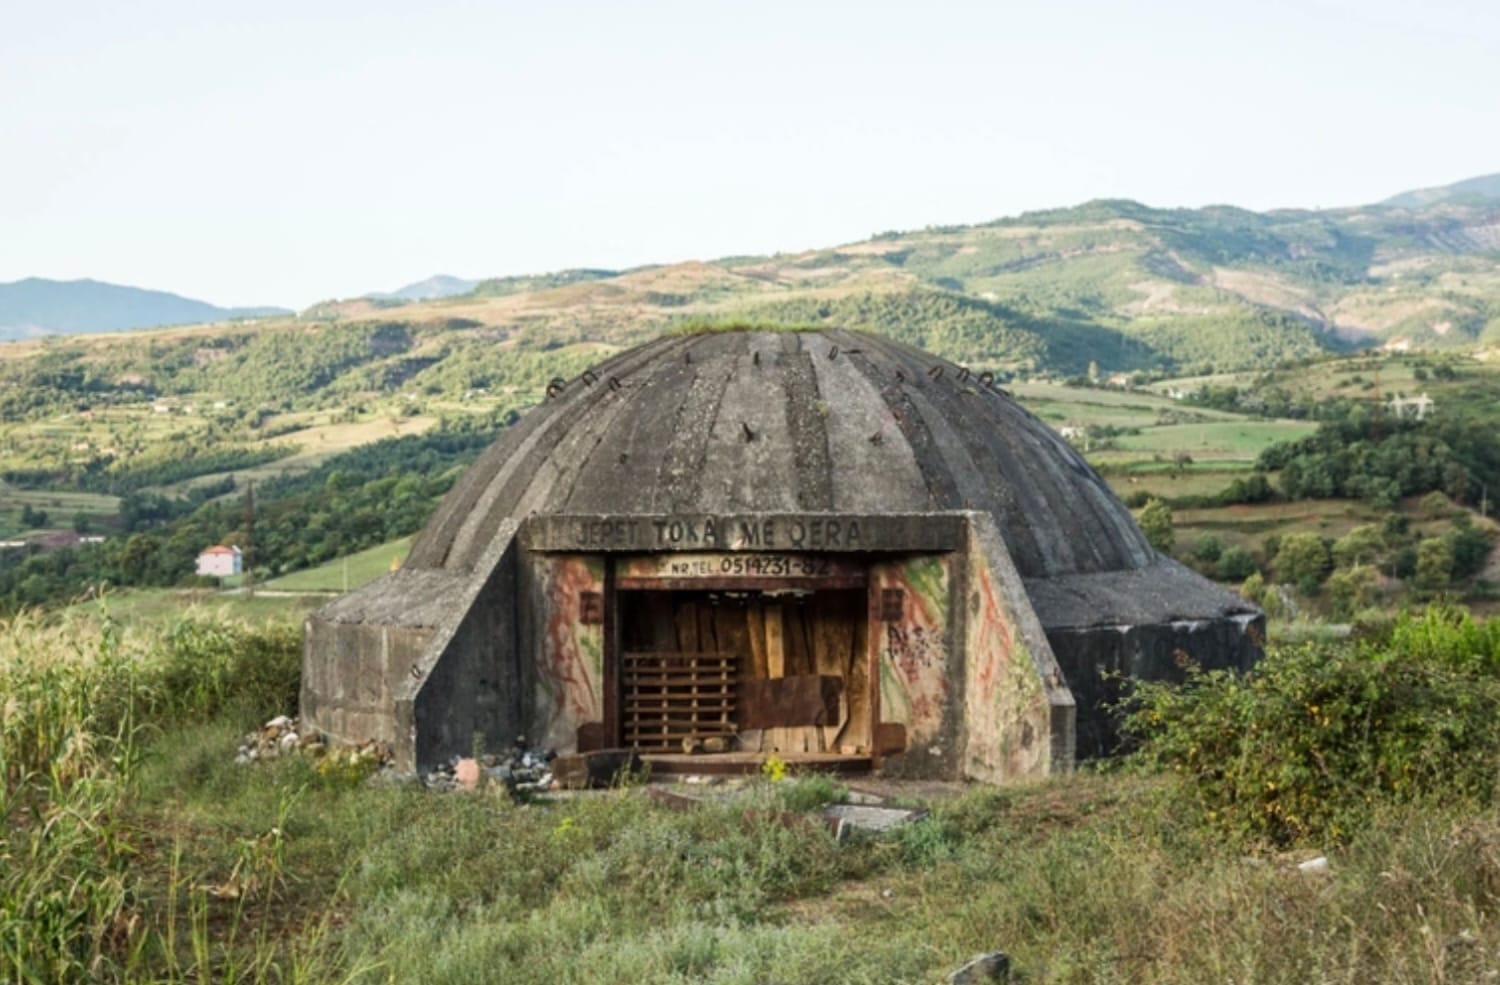 Albania - Part 3, A bunker obsession